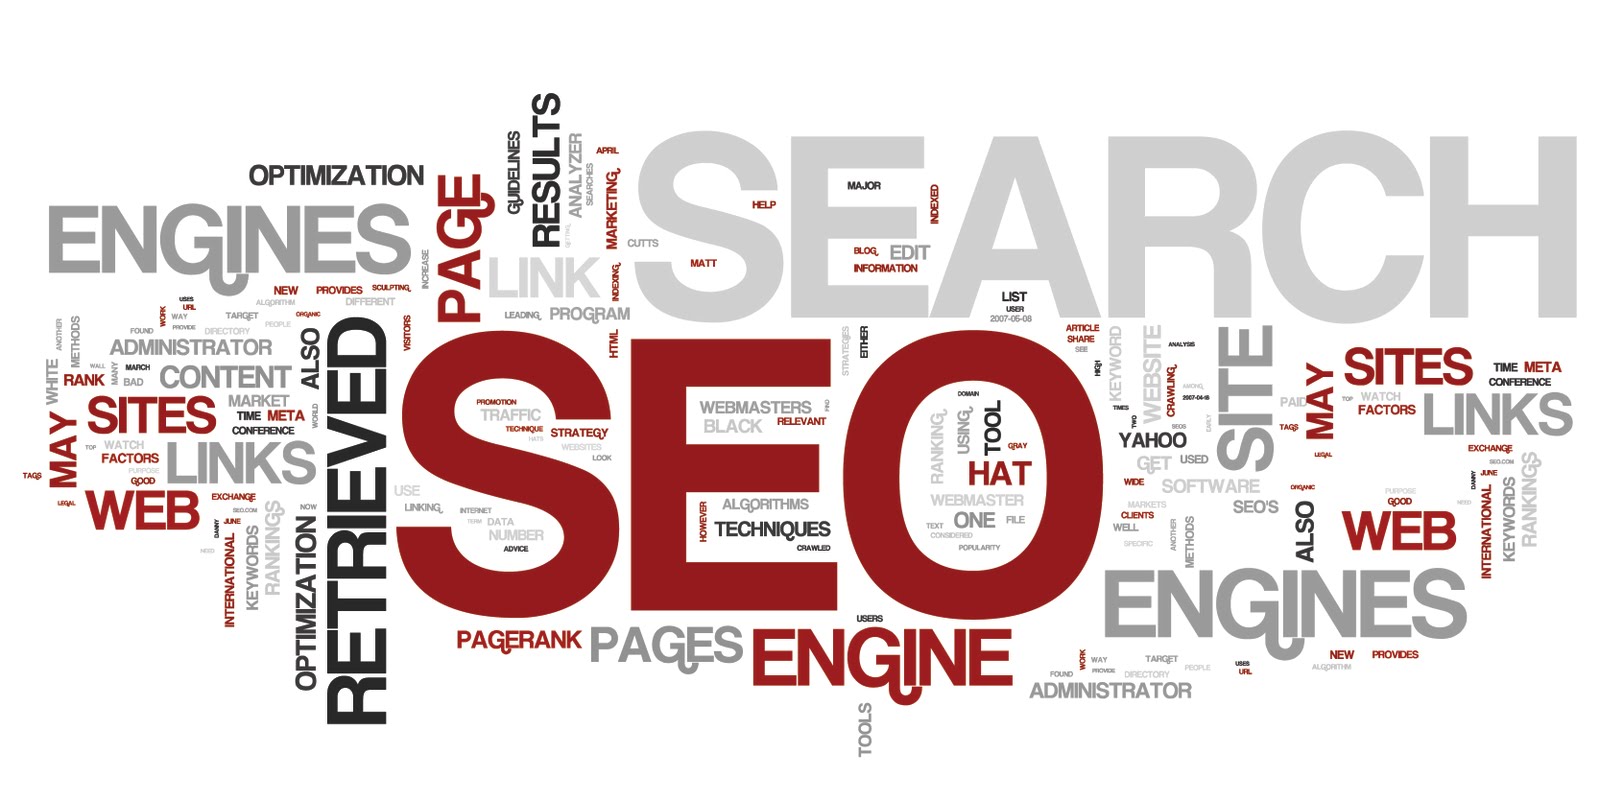 10 Tried And Tested Lead Generation Strategies That Work image 2 seo.jpg